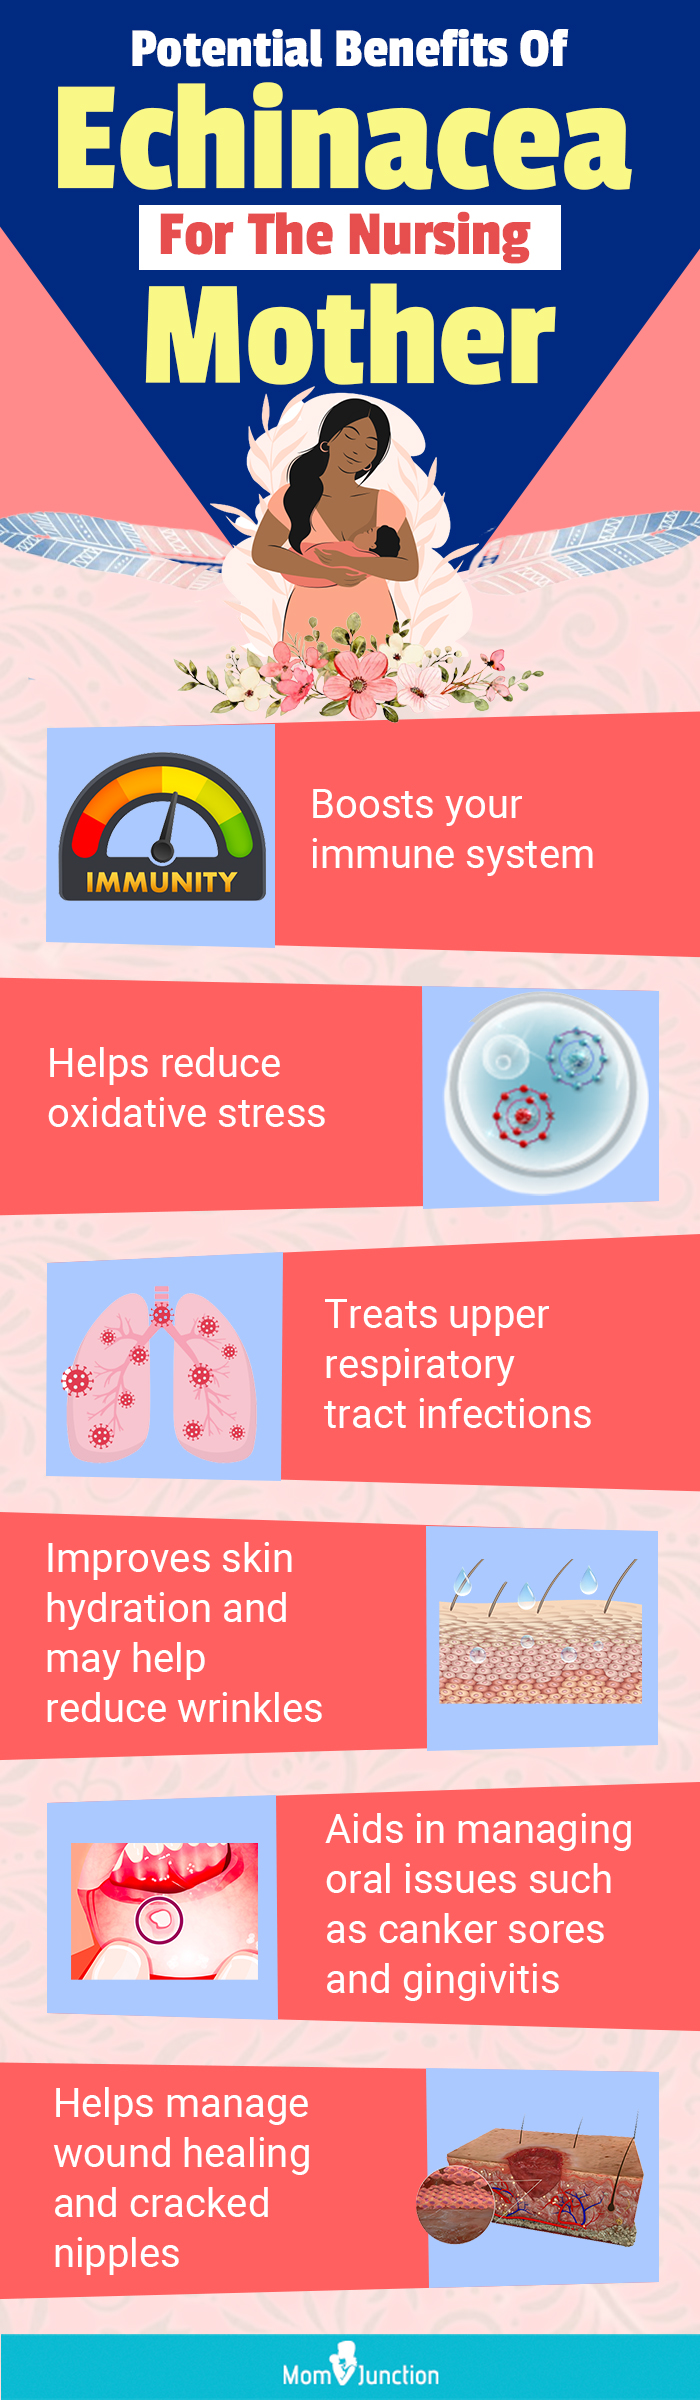 potential benefits of echincea for the nursing mother (infographic)